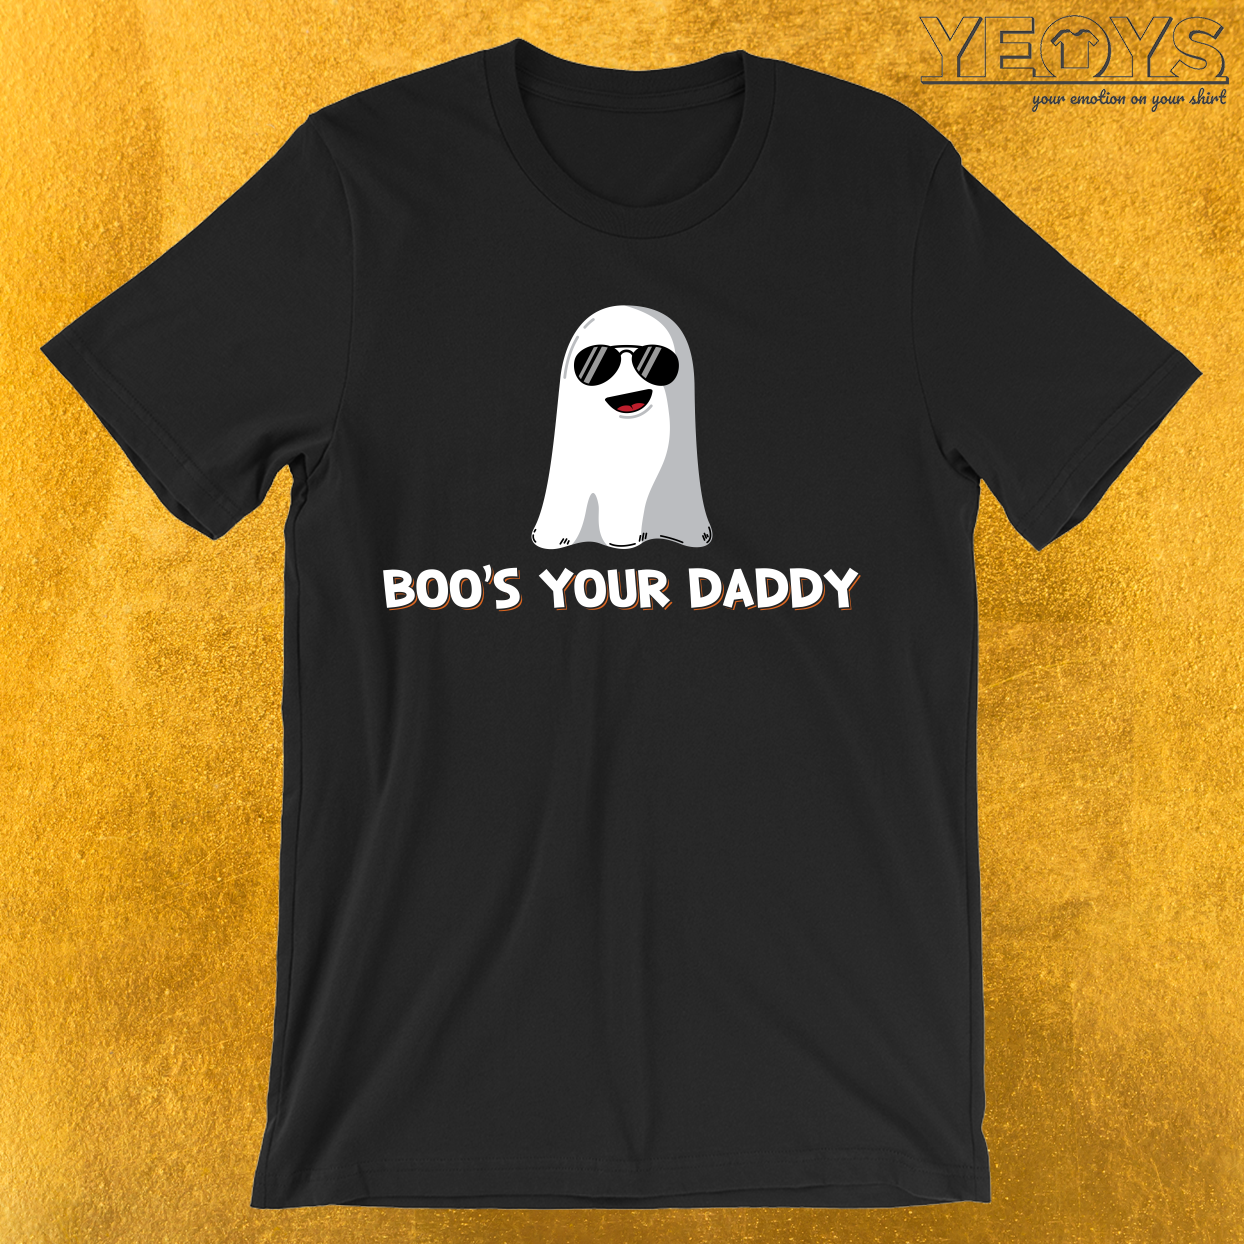 Boo’s Your Daddy T-Shirt